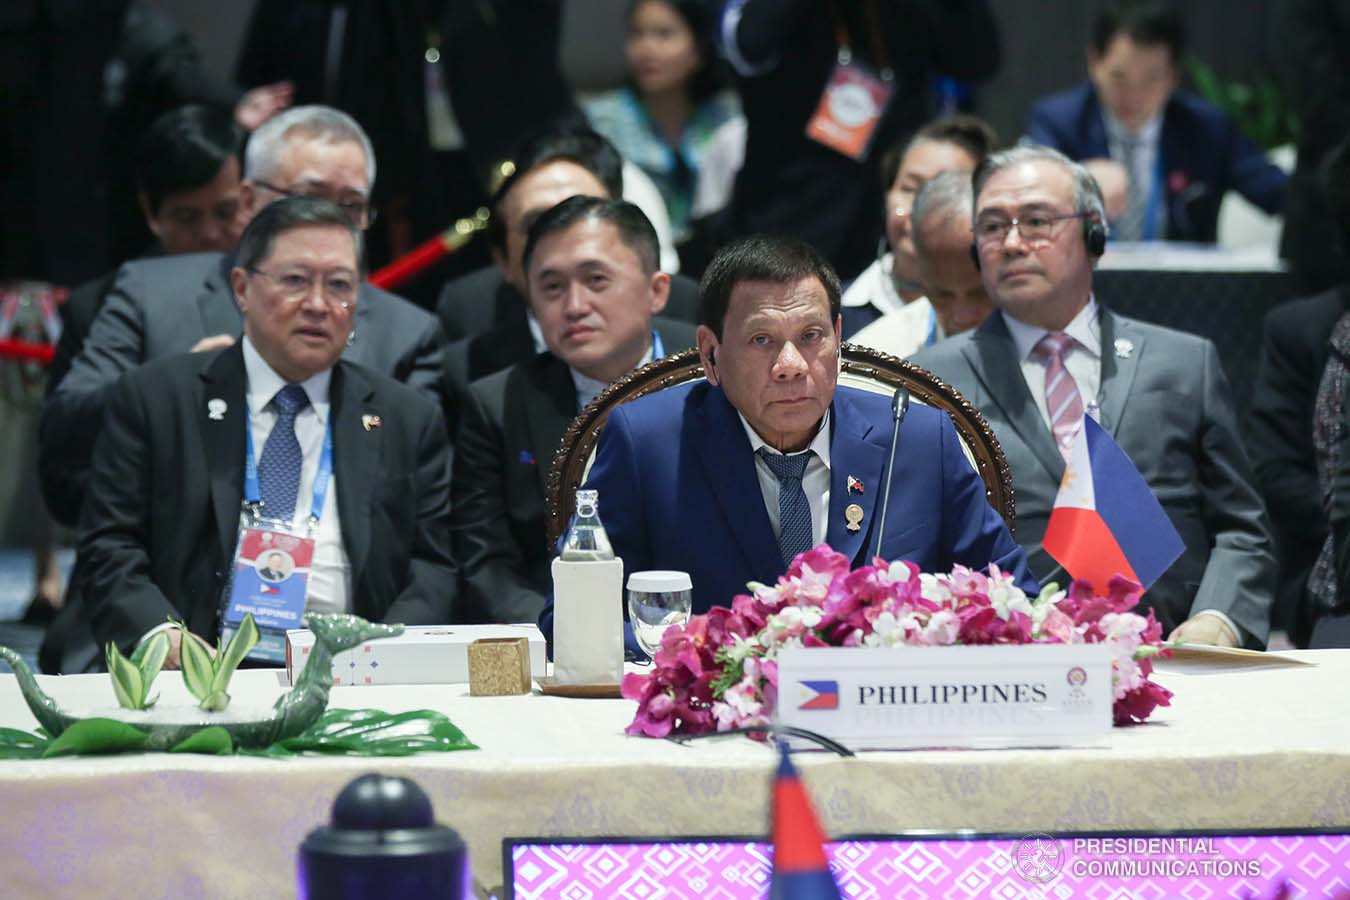 President Rodrigo Roa Duterte joins other leaders from the Association of Southeast Asian Nations (ASEAN) member countries during the 35th ASEAN Summit Plenary at the Bangkok to Impact Exhibition and Convention Center in Nonthaburi, Thailand on November 2, 2019. SIMEON CELI JR./PRESIDENTIAL PHOTO